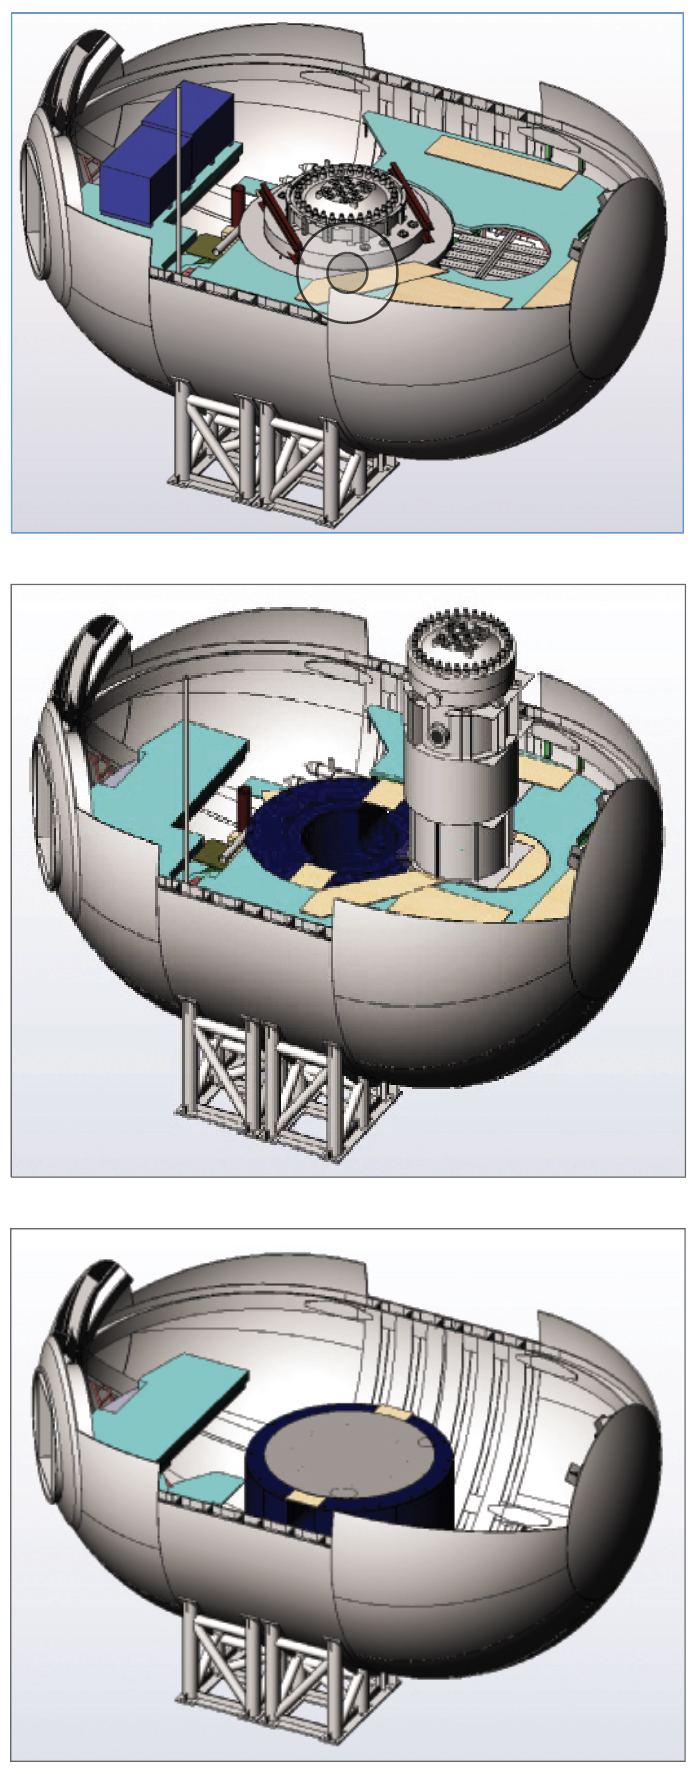 set of three drawings showing the steps taken to dismantle the reactor containment vessel onboard a ship